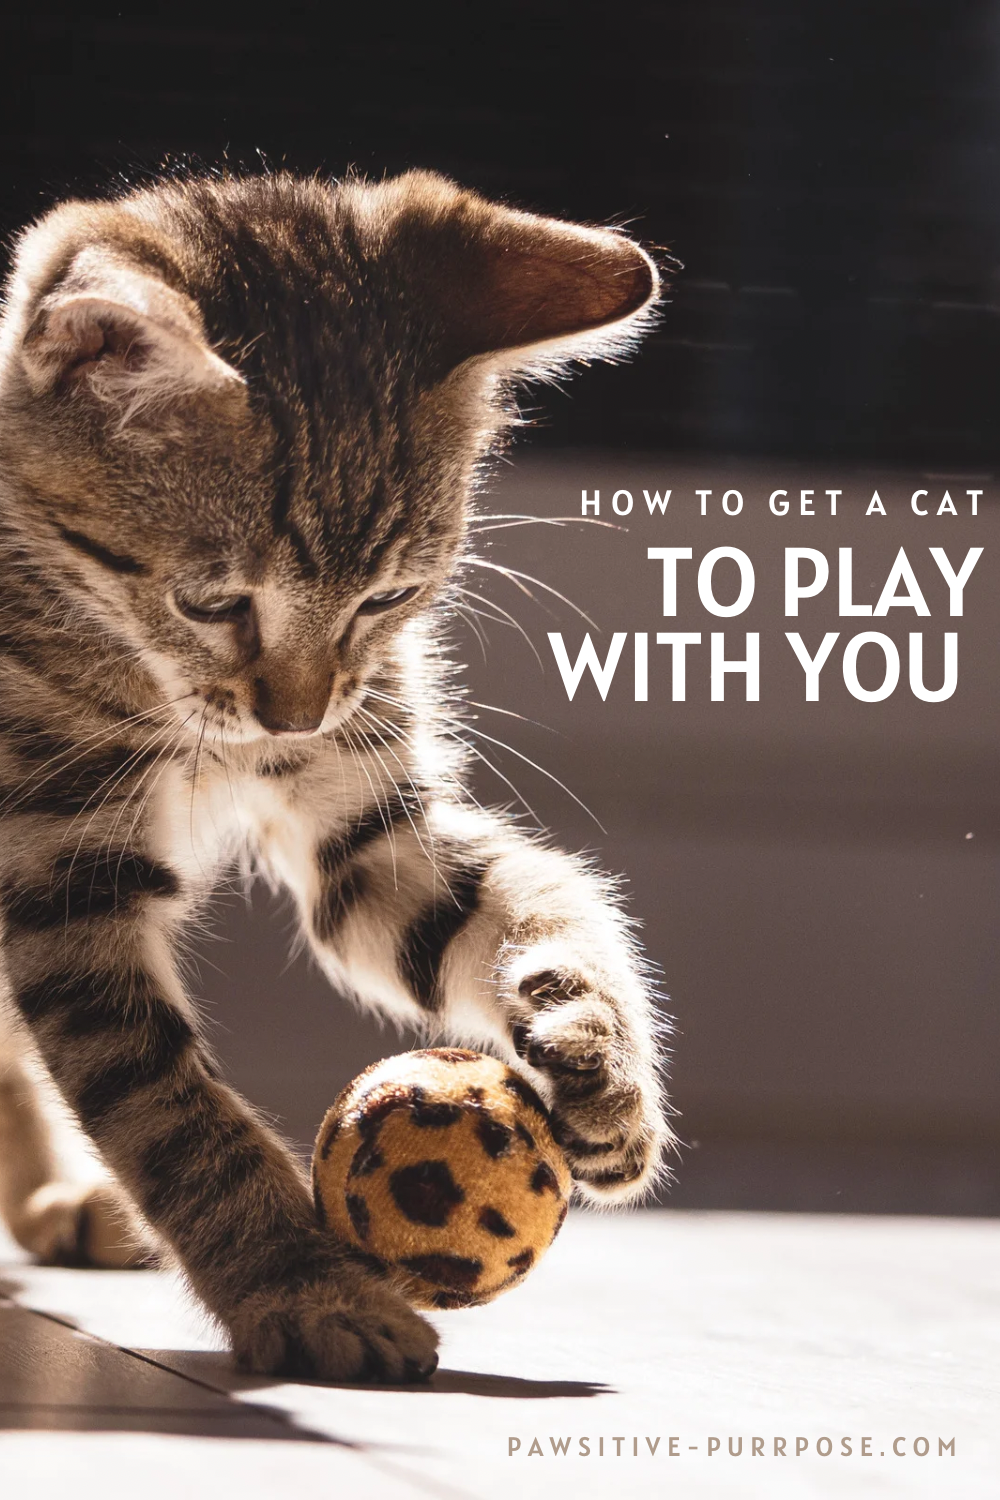 Picture of gray tabby cat playing with ball and text how to get a cat to play with you